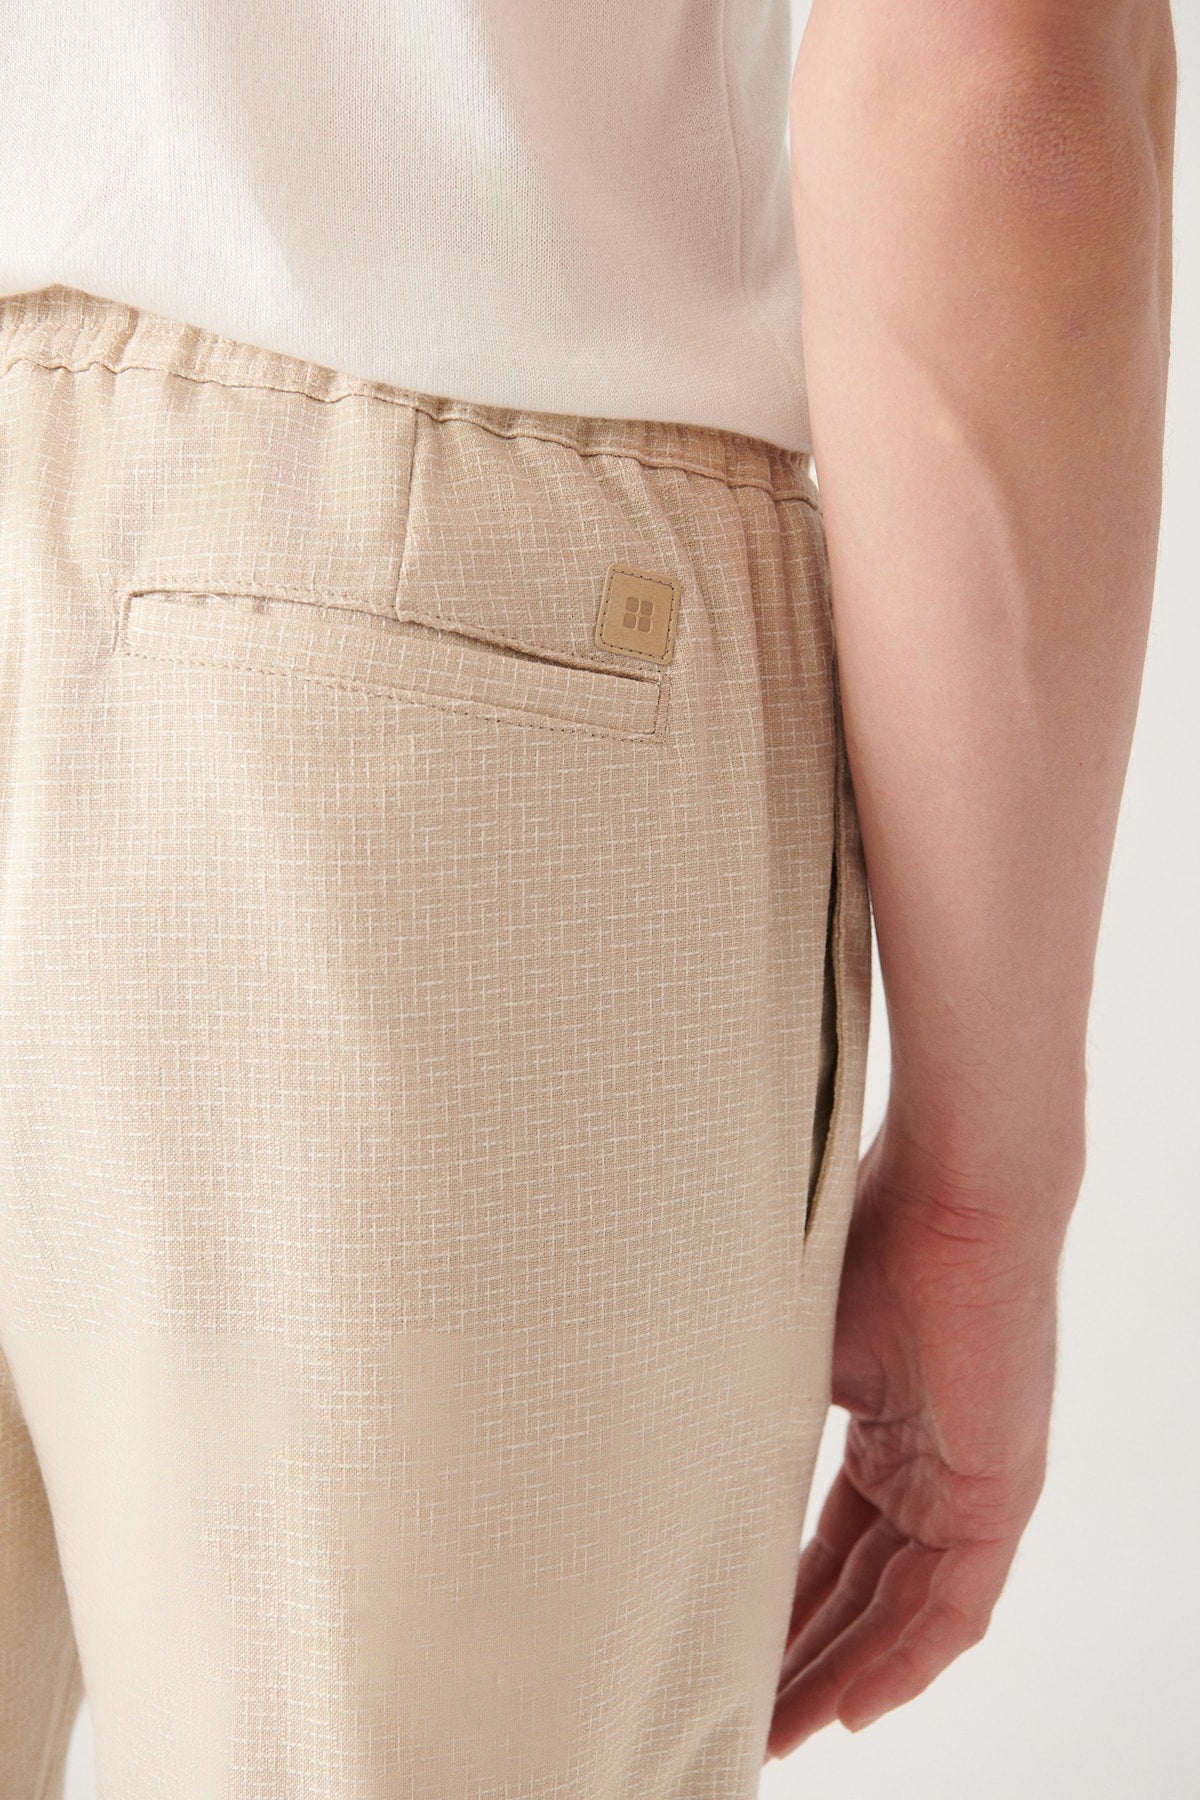 Men's Beige Patterned Lycra Relaxed Fit Jogger Pants A31y3008